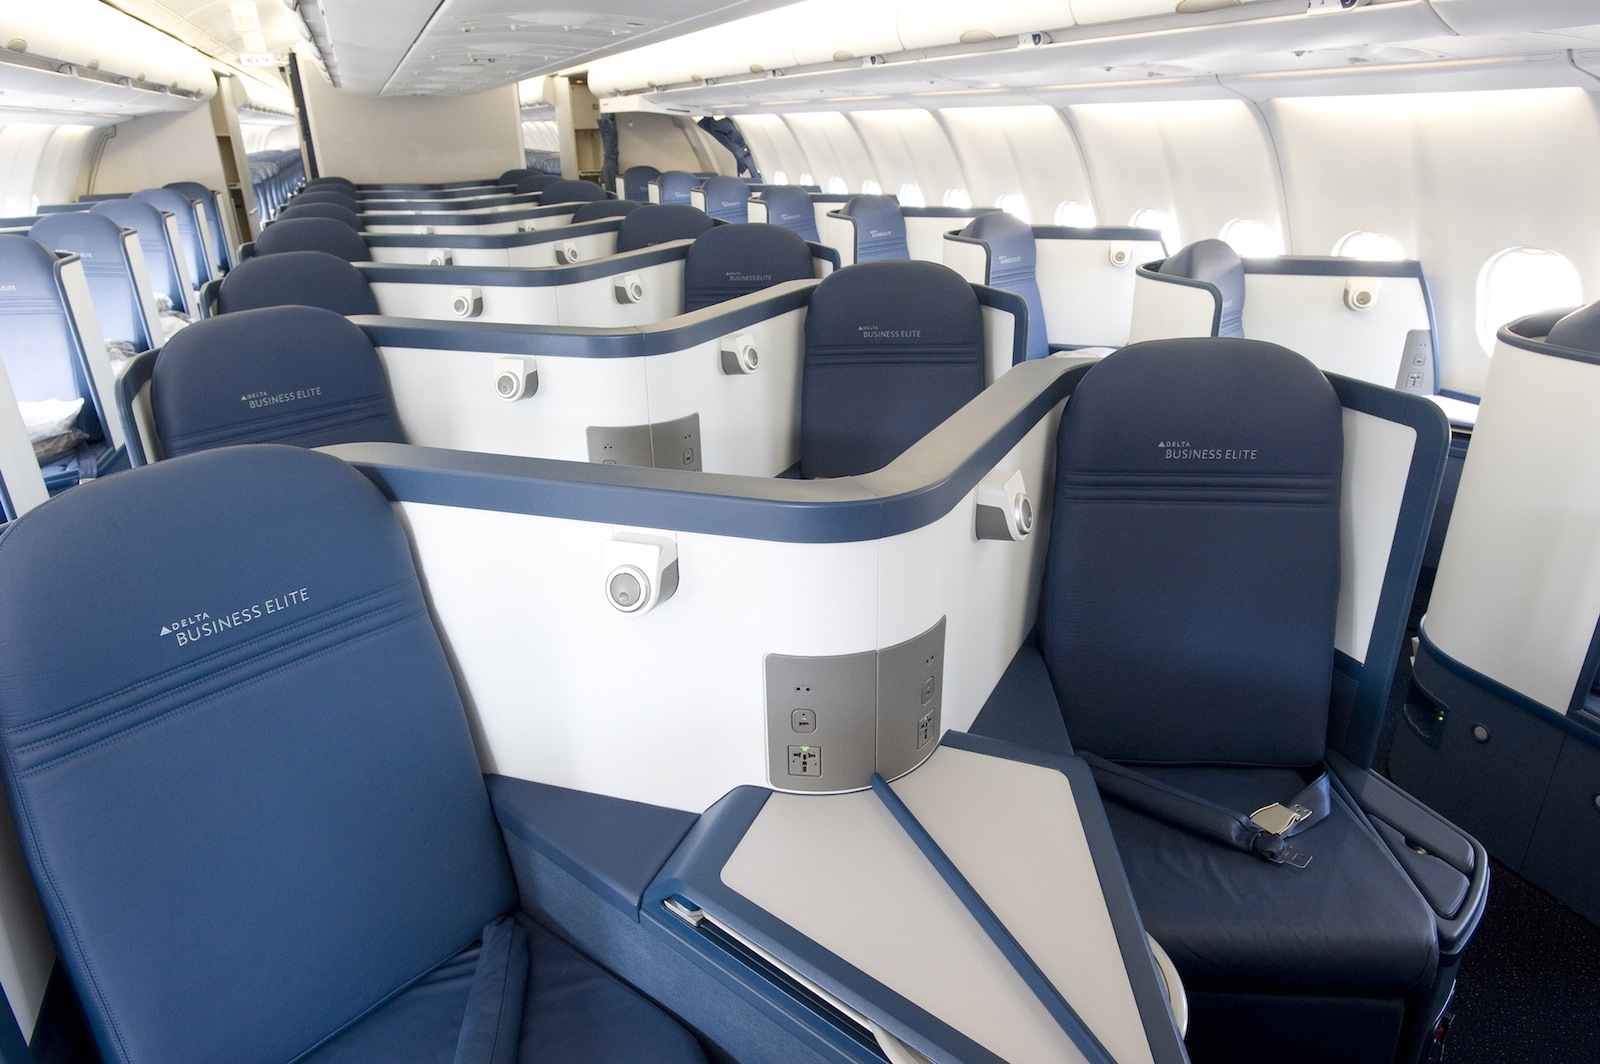 Delta Completes Full Flat Bed Seats Installation On All